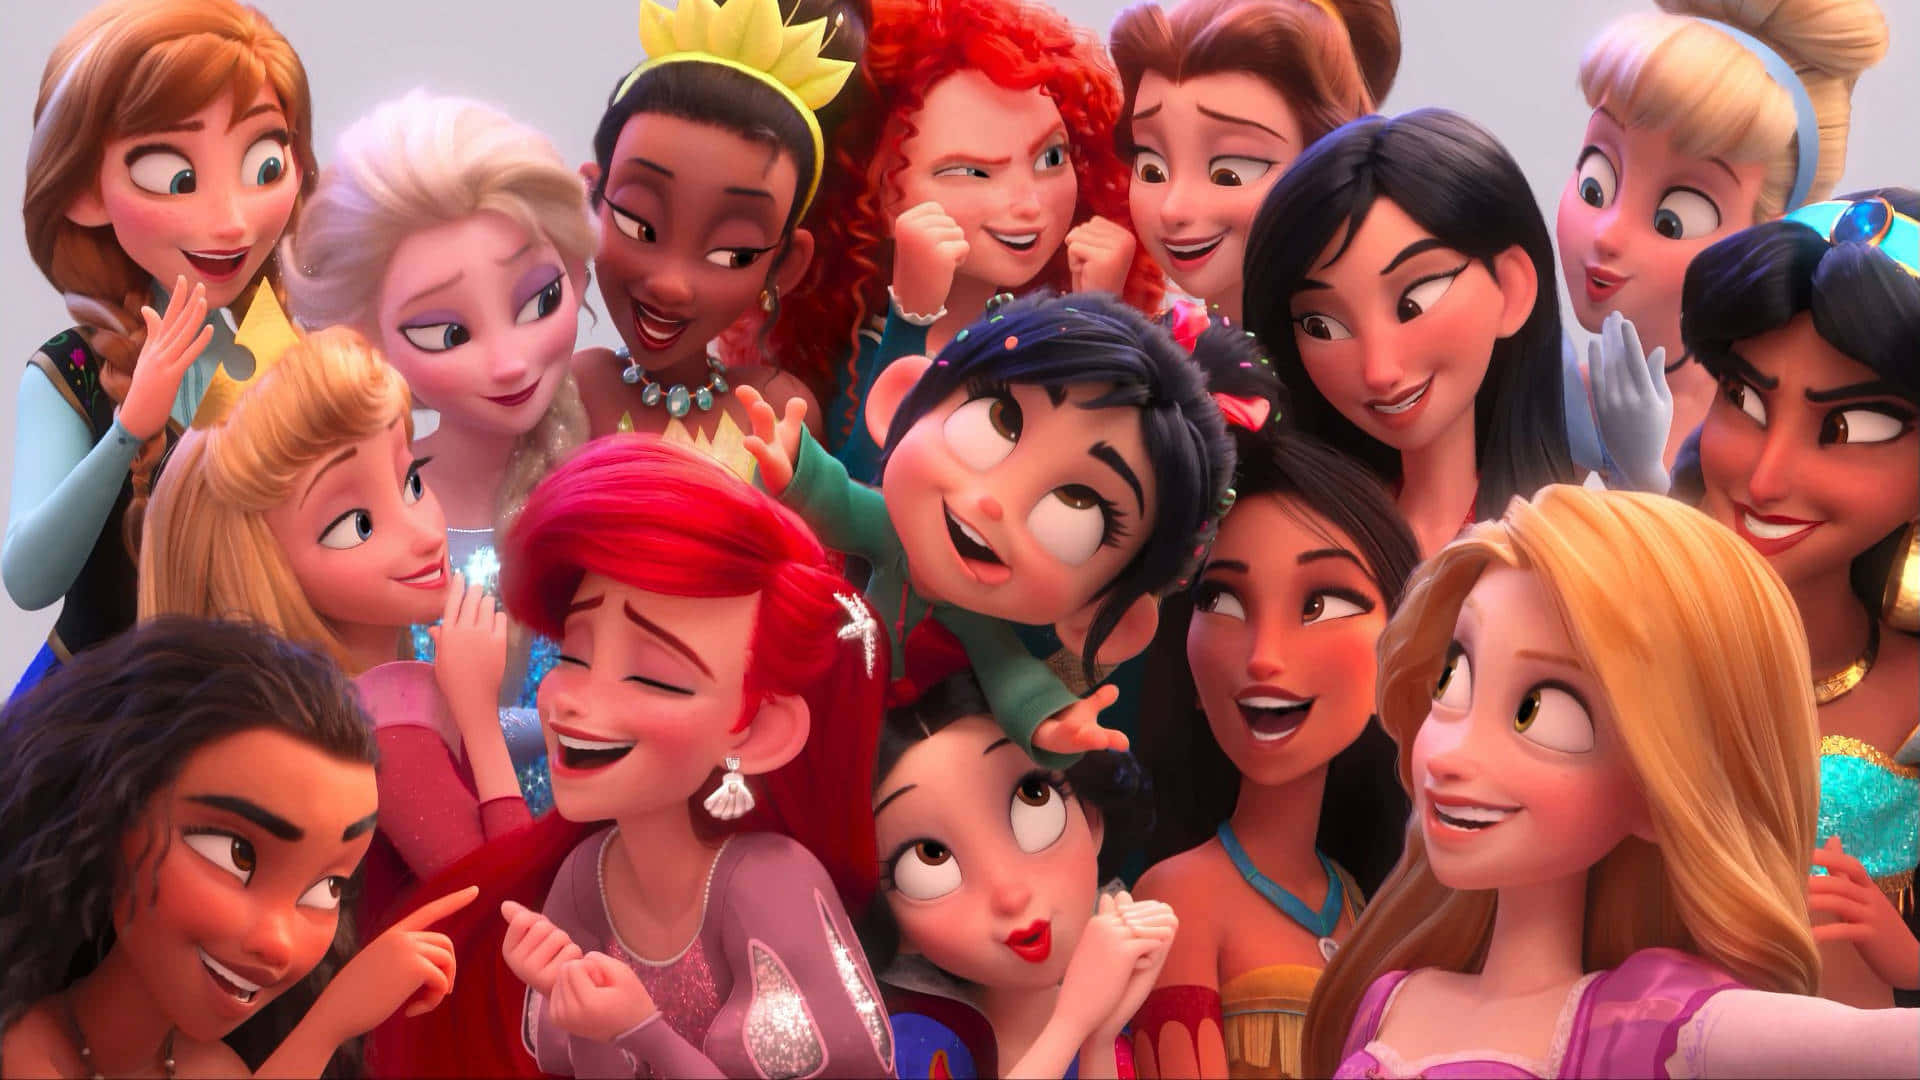 Disney Princesses In A Group Of Girls